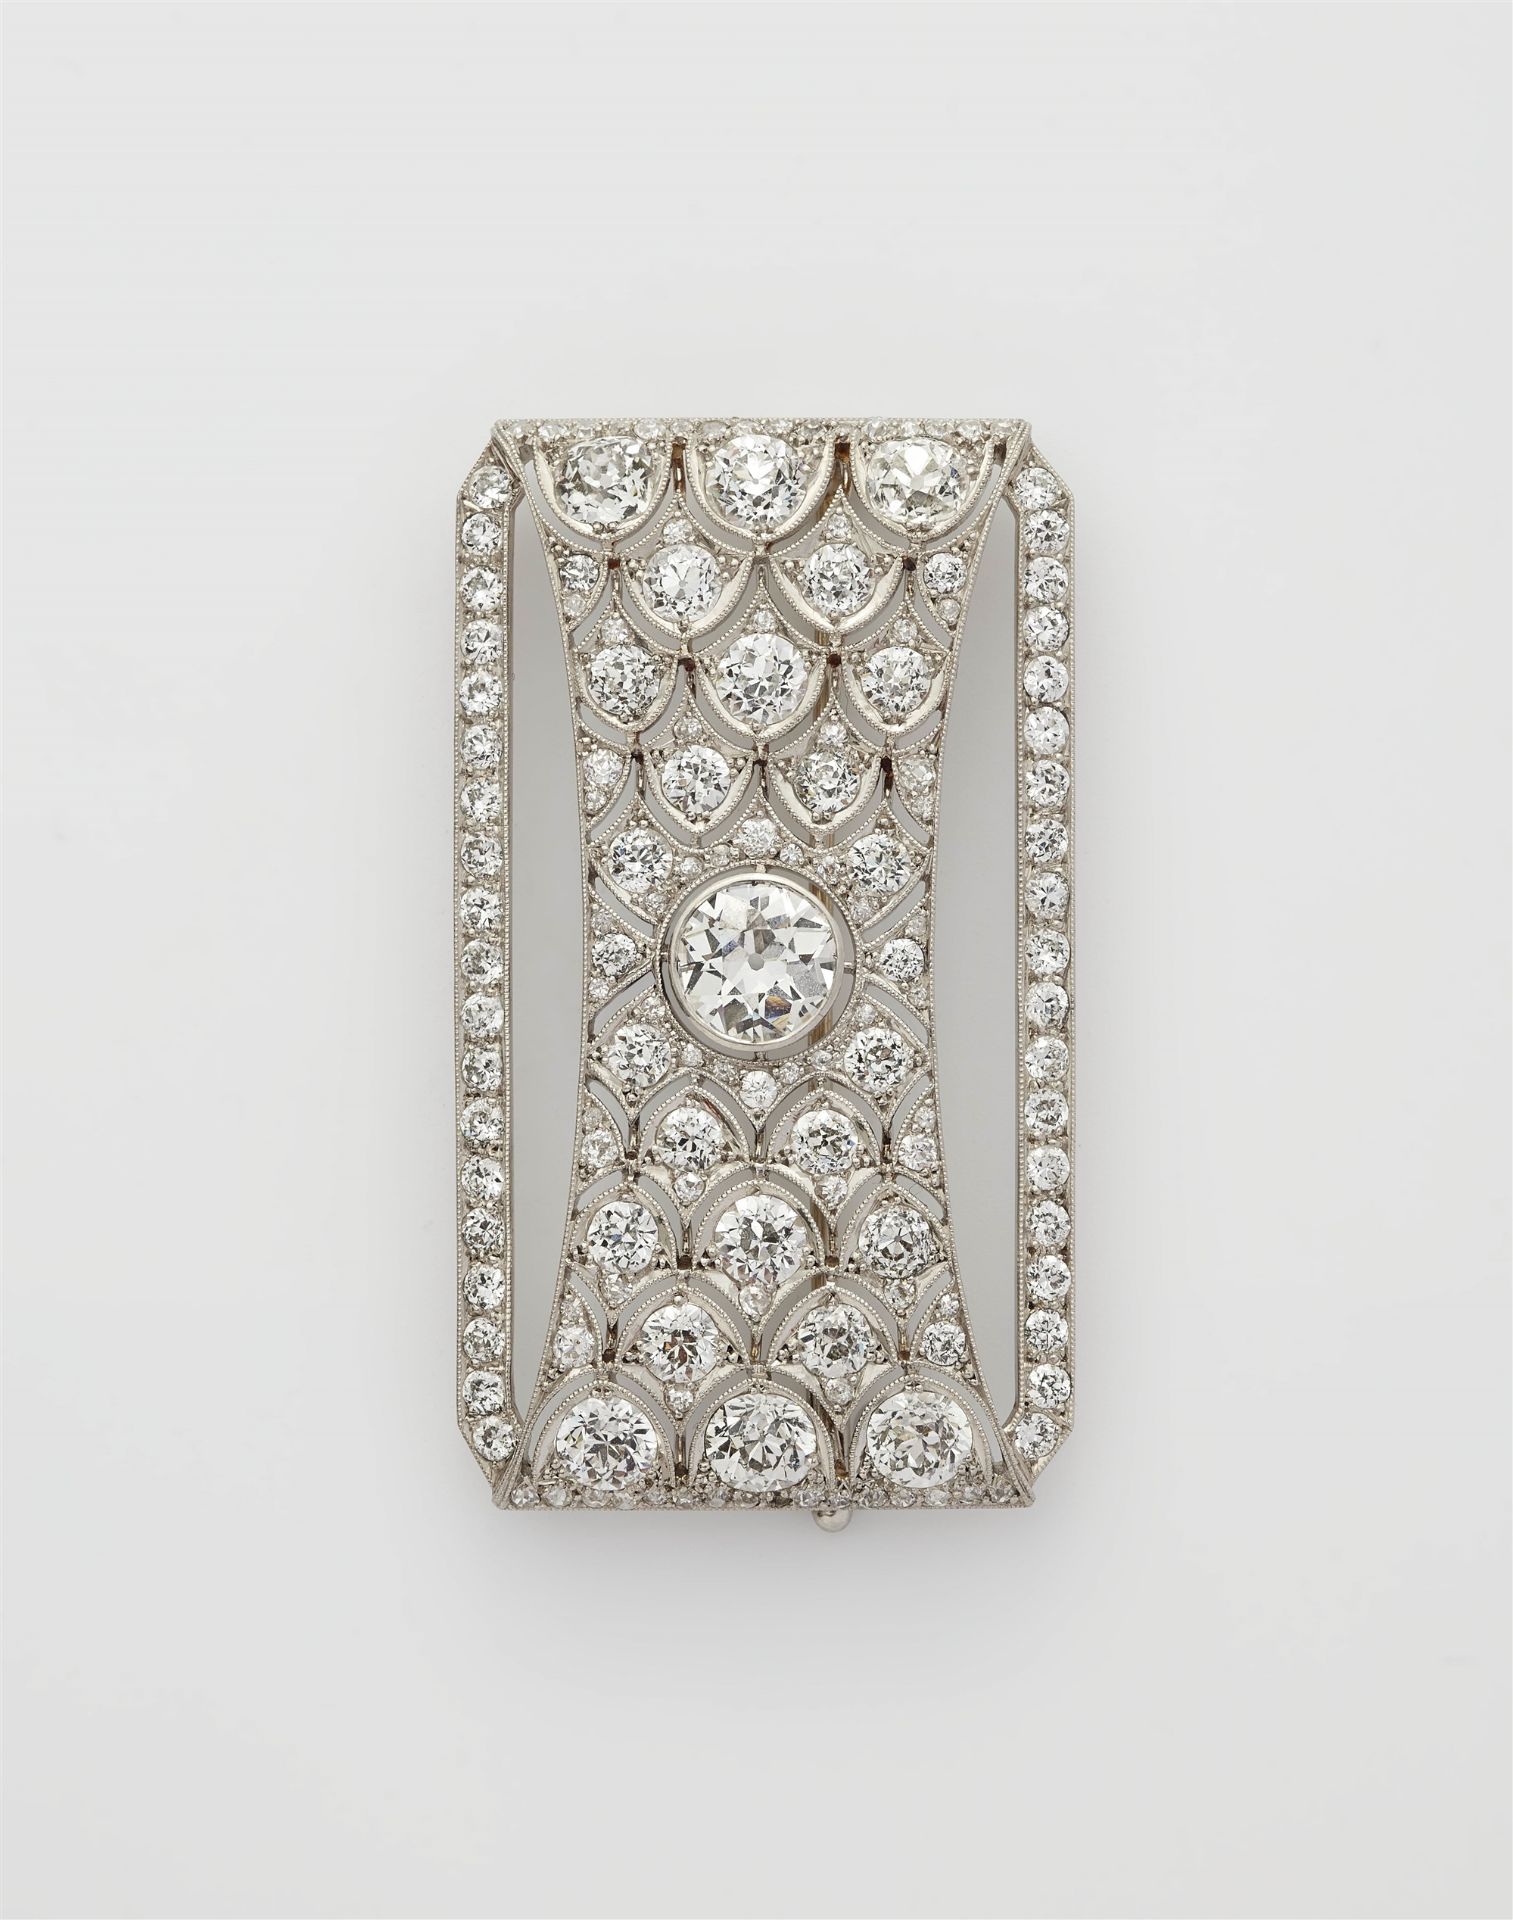 A Belle Epoque platinum diamond brooch with 18k gold pin.